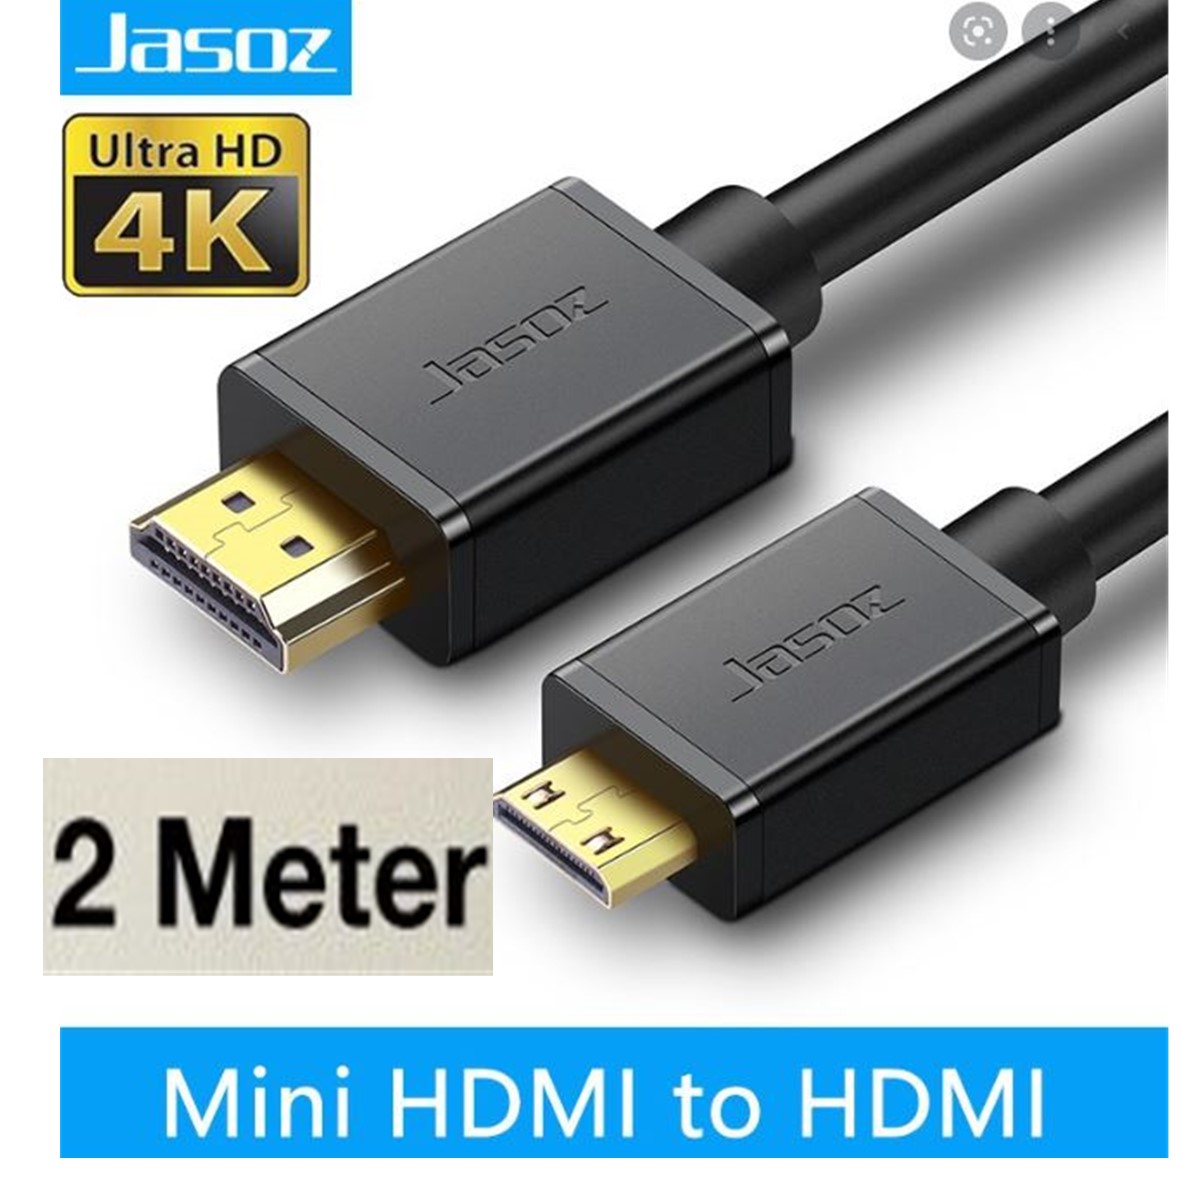 Mini HDMI To HDMI Cable Adapter For DV HDTV FULL HD 1080P 4K 50cm